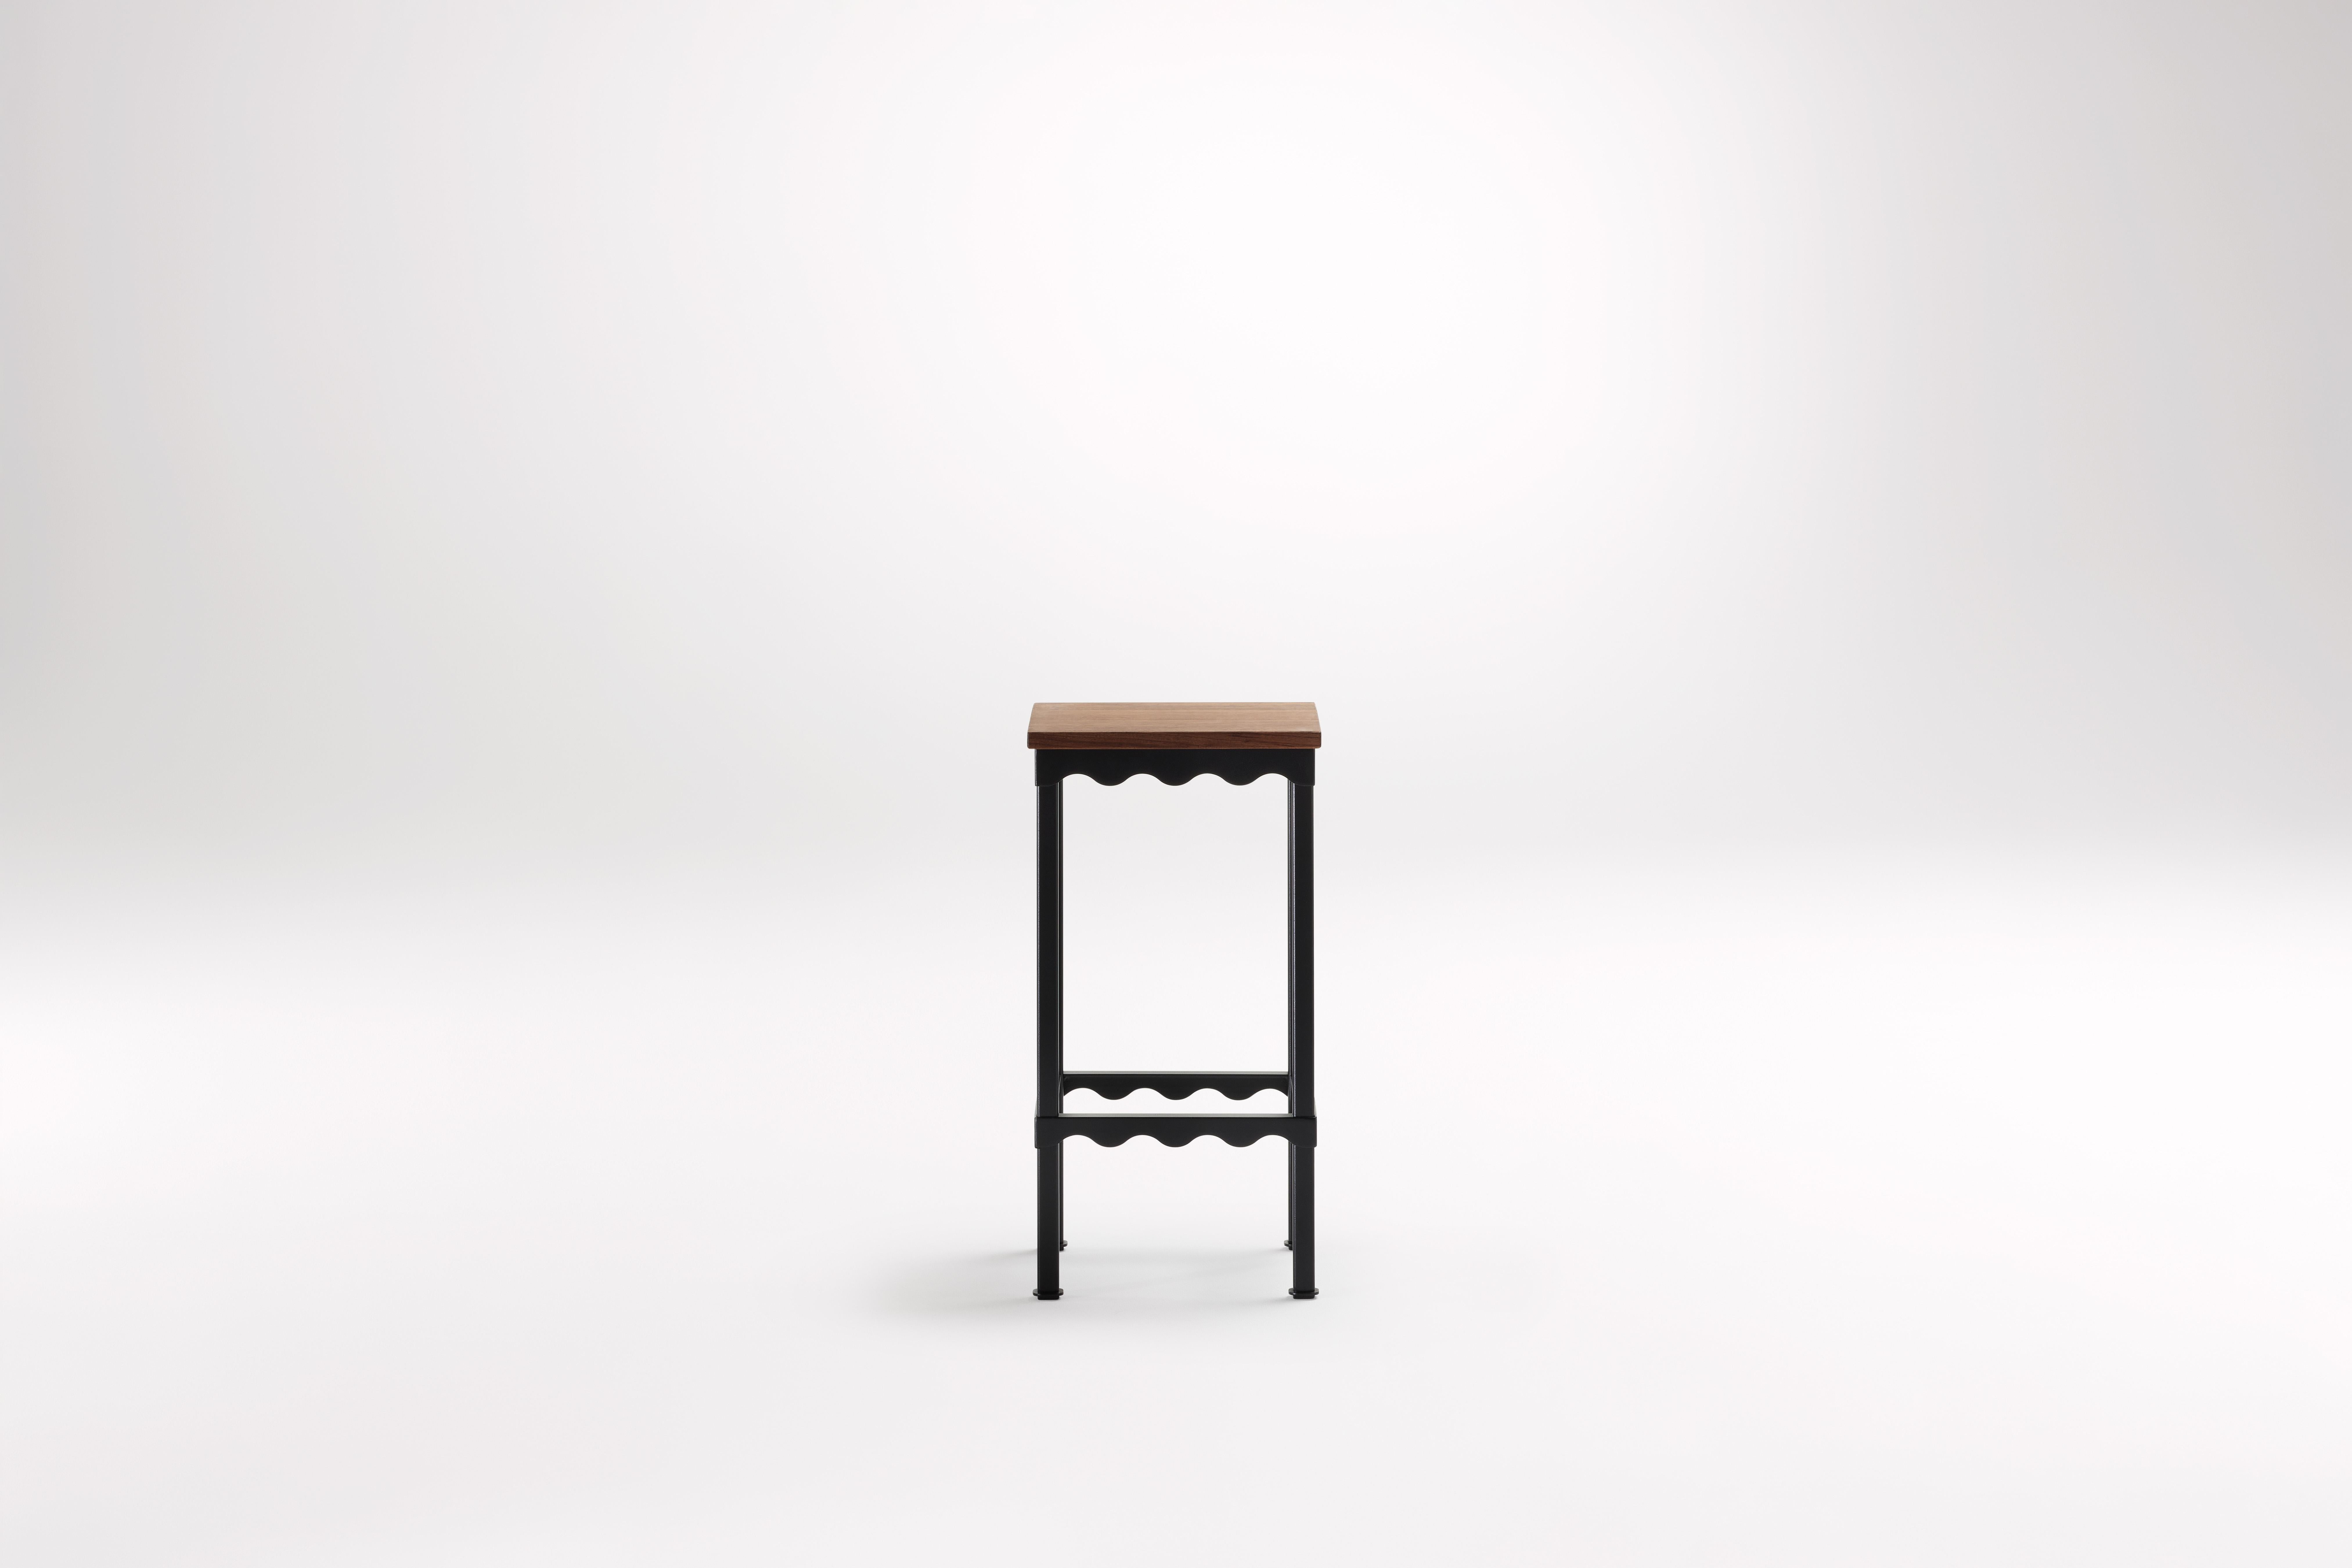 Blackwood Bellini High Stool by Coco Flip
Dimensions: D 34 x W 34 x H 65/75 cm
Materials: Timber / Stone tops, Powder-coated steel frame. 
Weight: 8kg
Frame Finishes: Textura Black.

Coco Flip is a Melbourne based furniture and lighting design